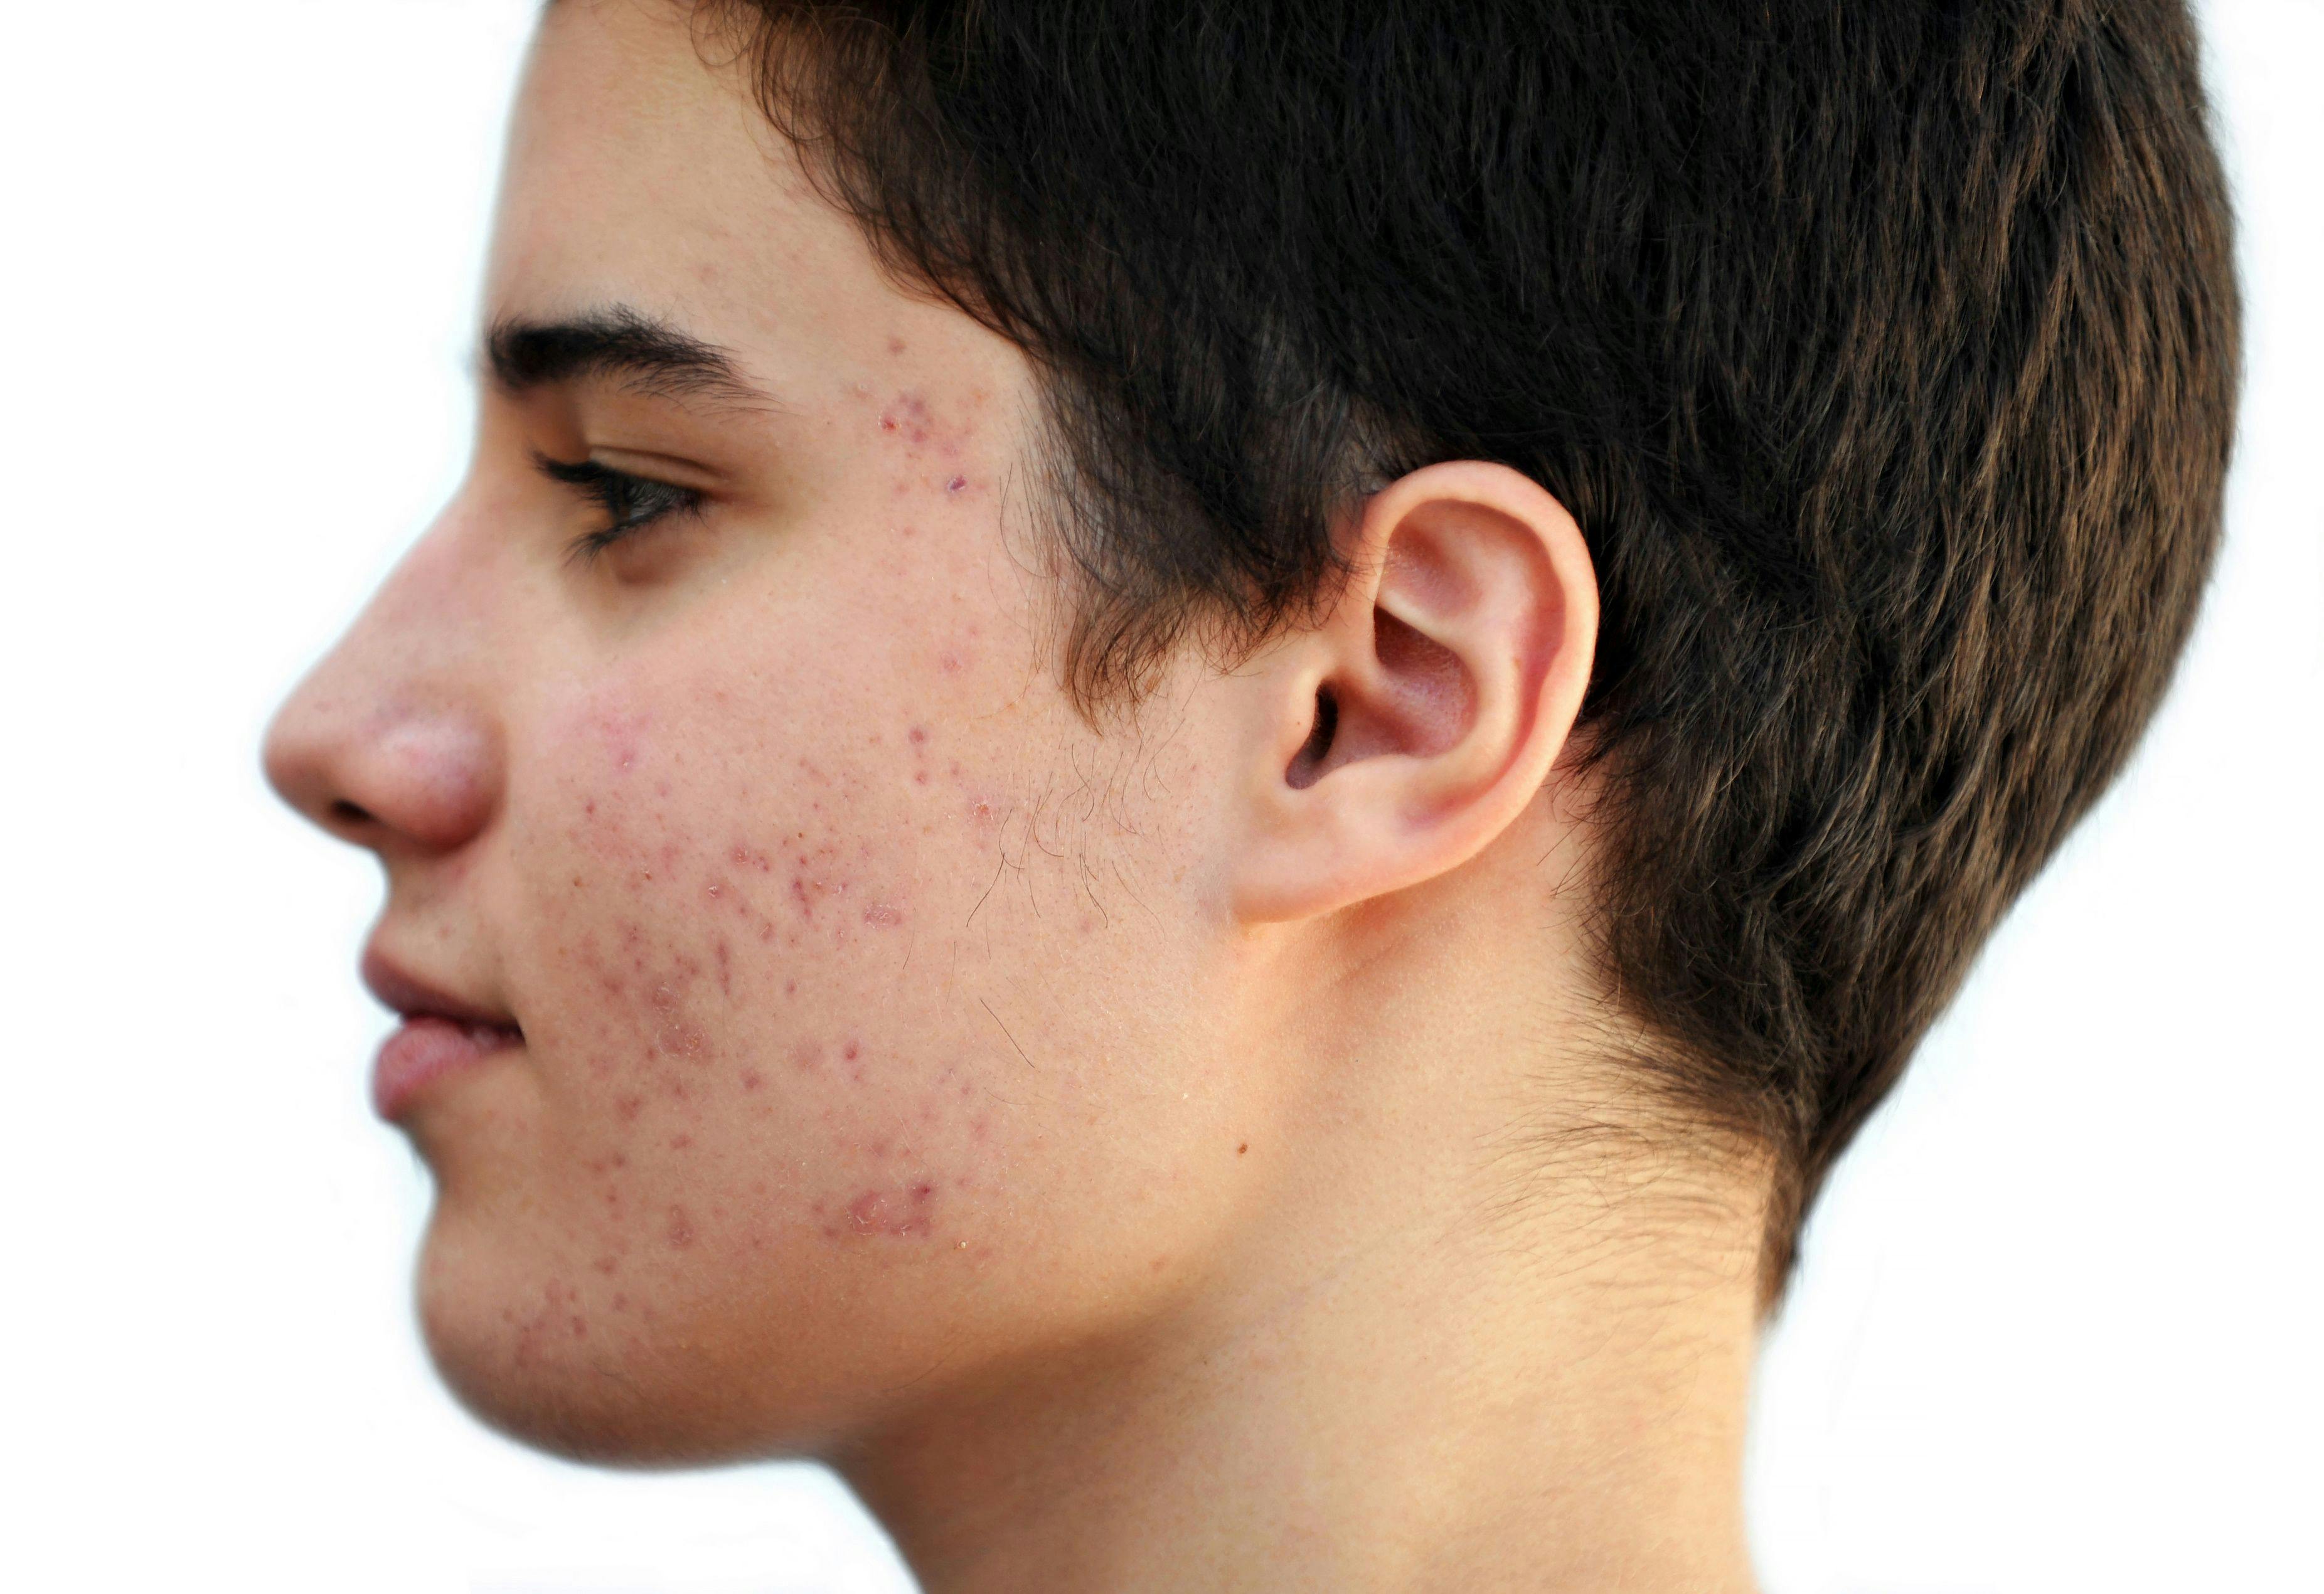 Topical androgen receptor inhibitor approved by FDA for acne